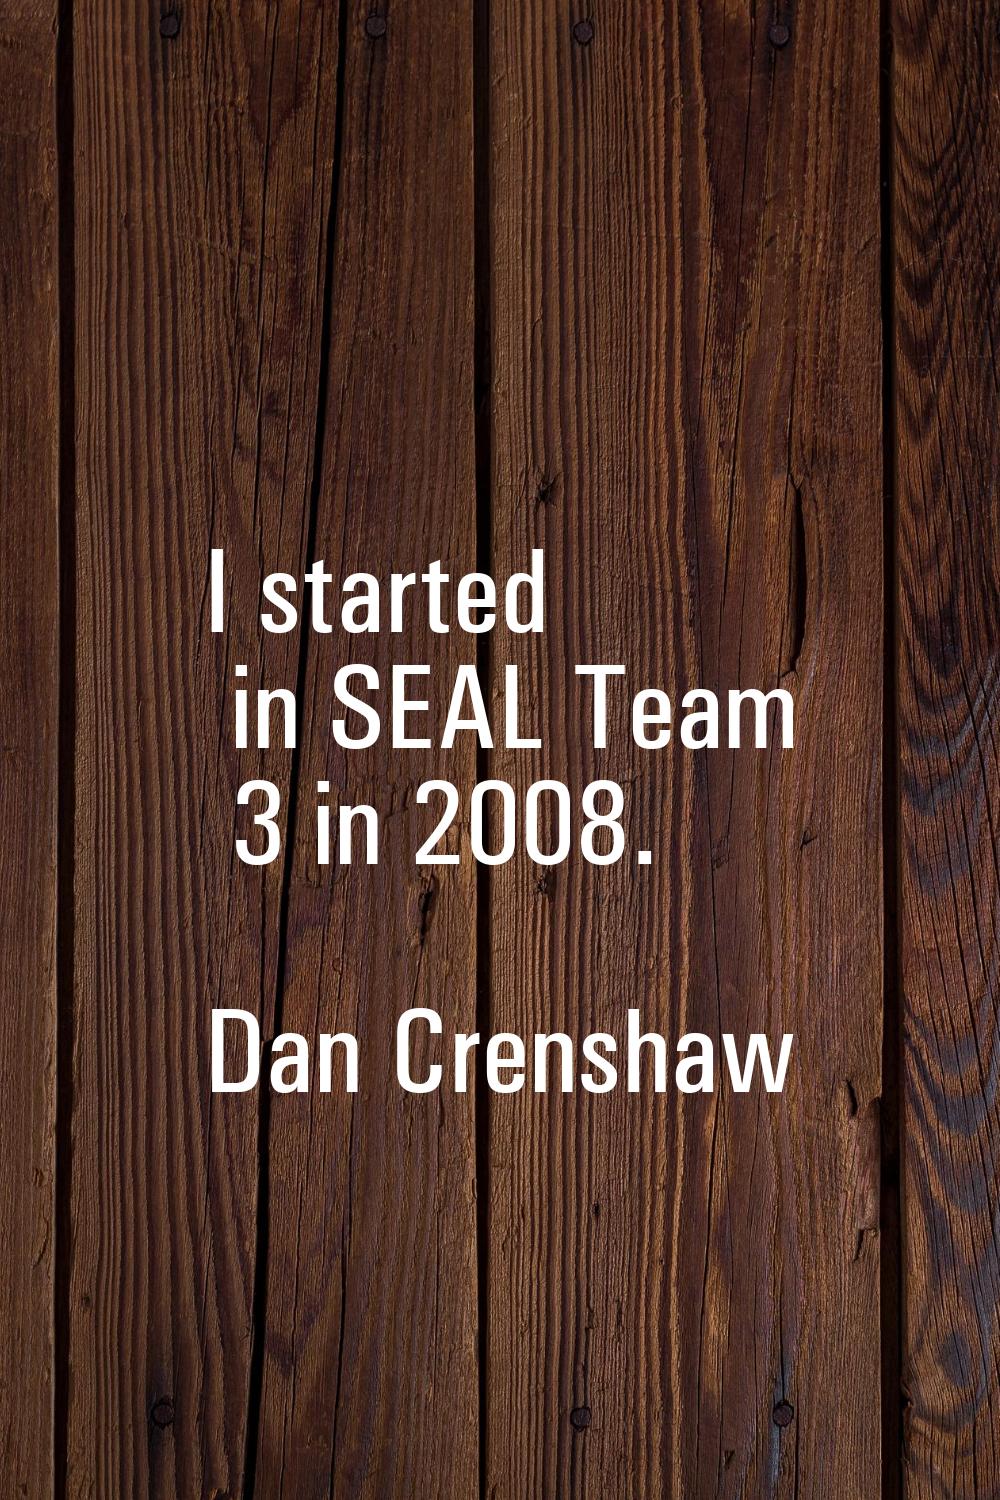 I started in SEAL Team 3 in 2008.